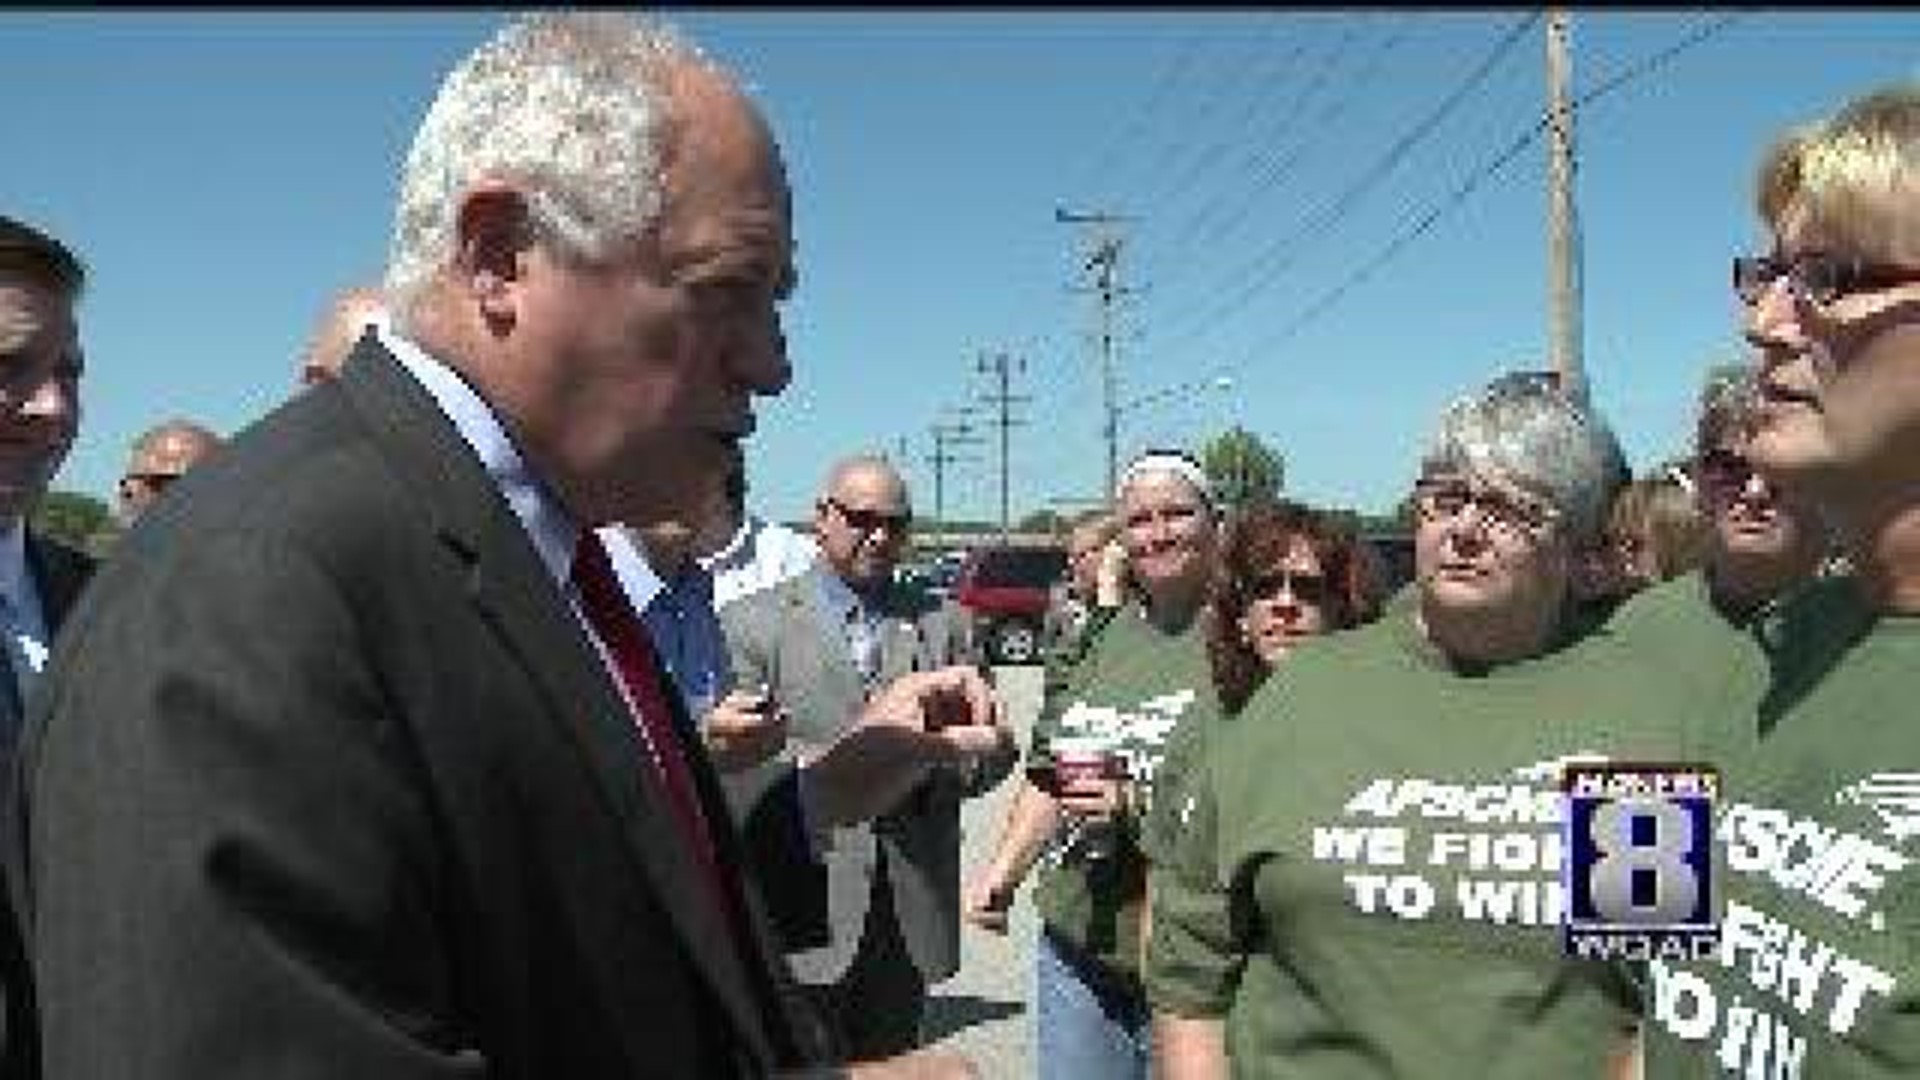 Workers protest at Governor Quinn appearance